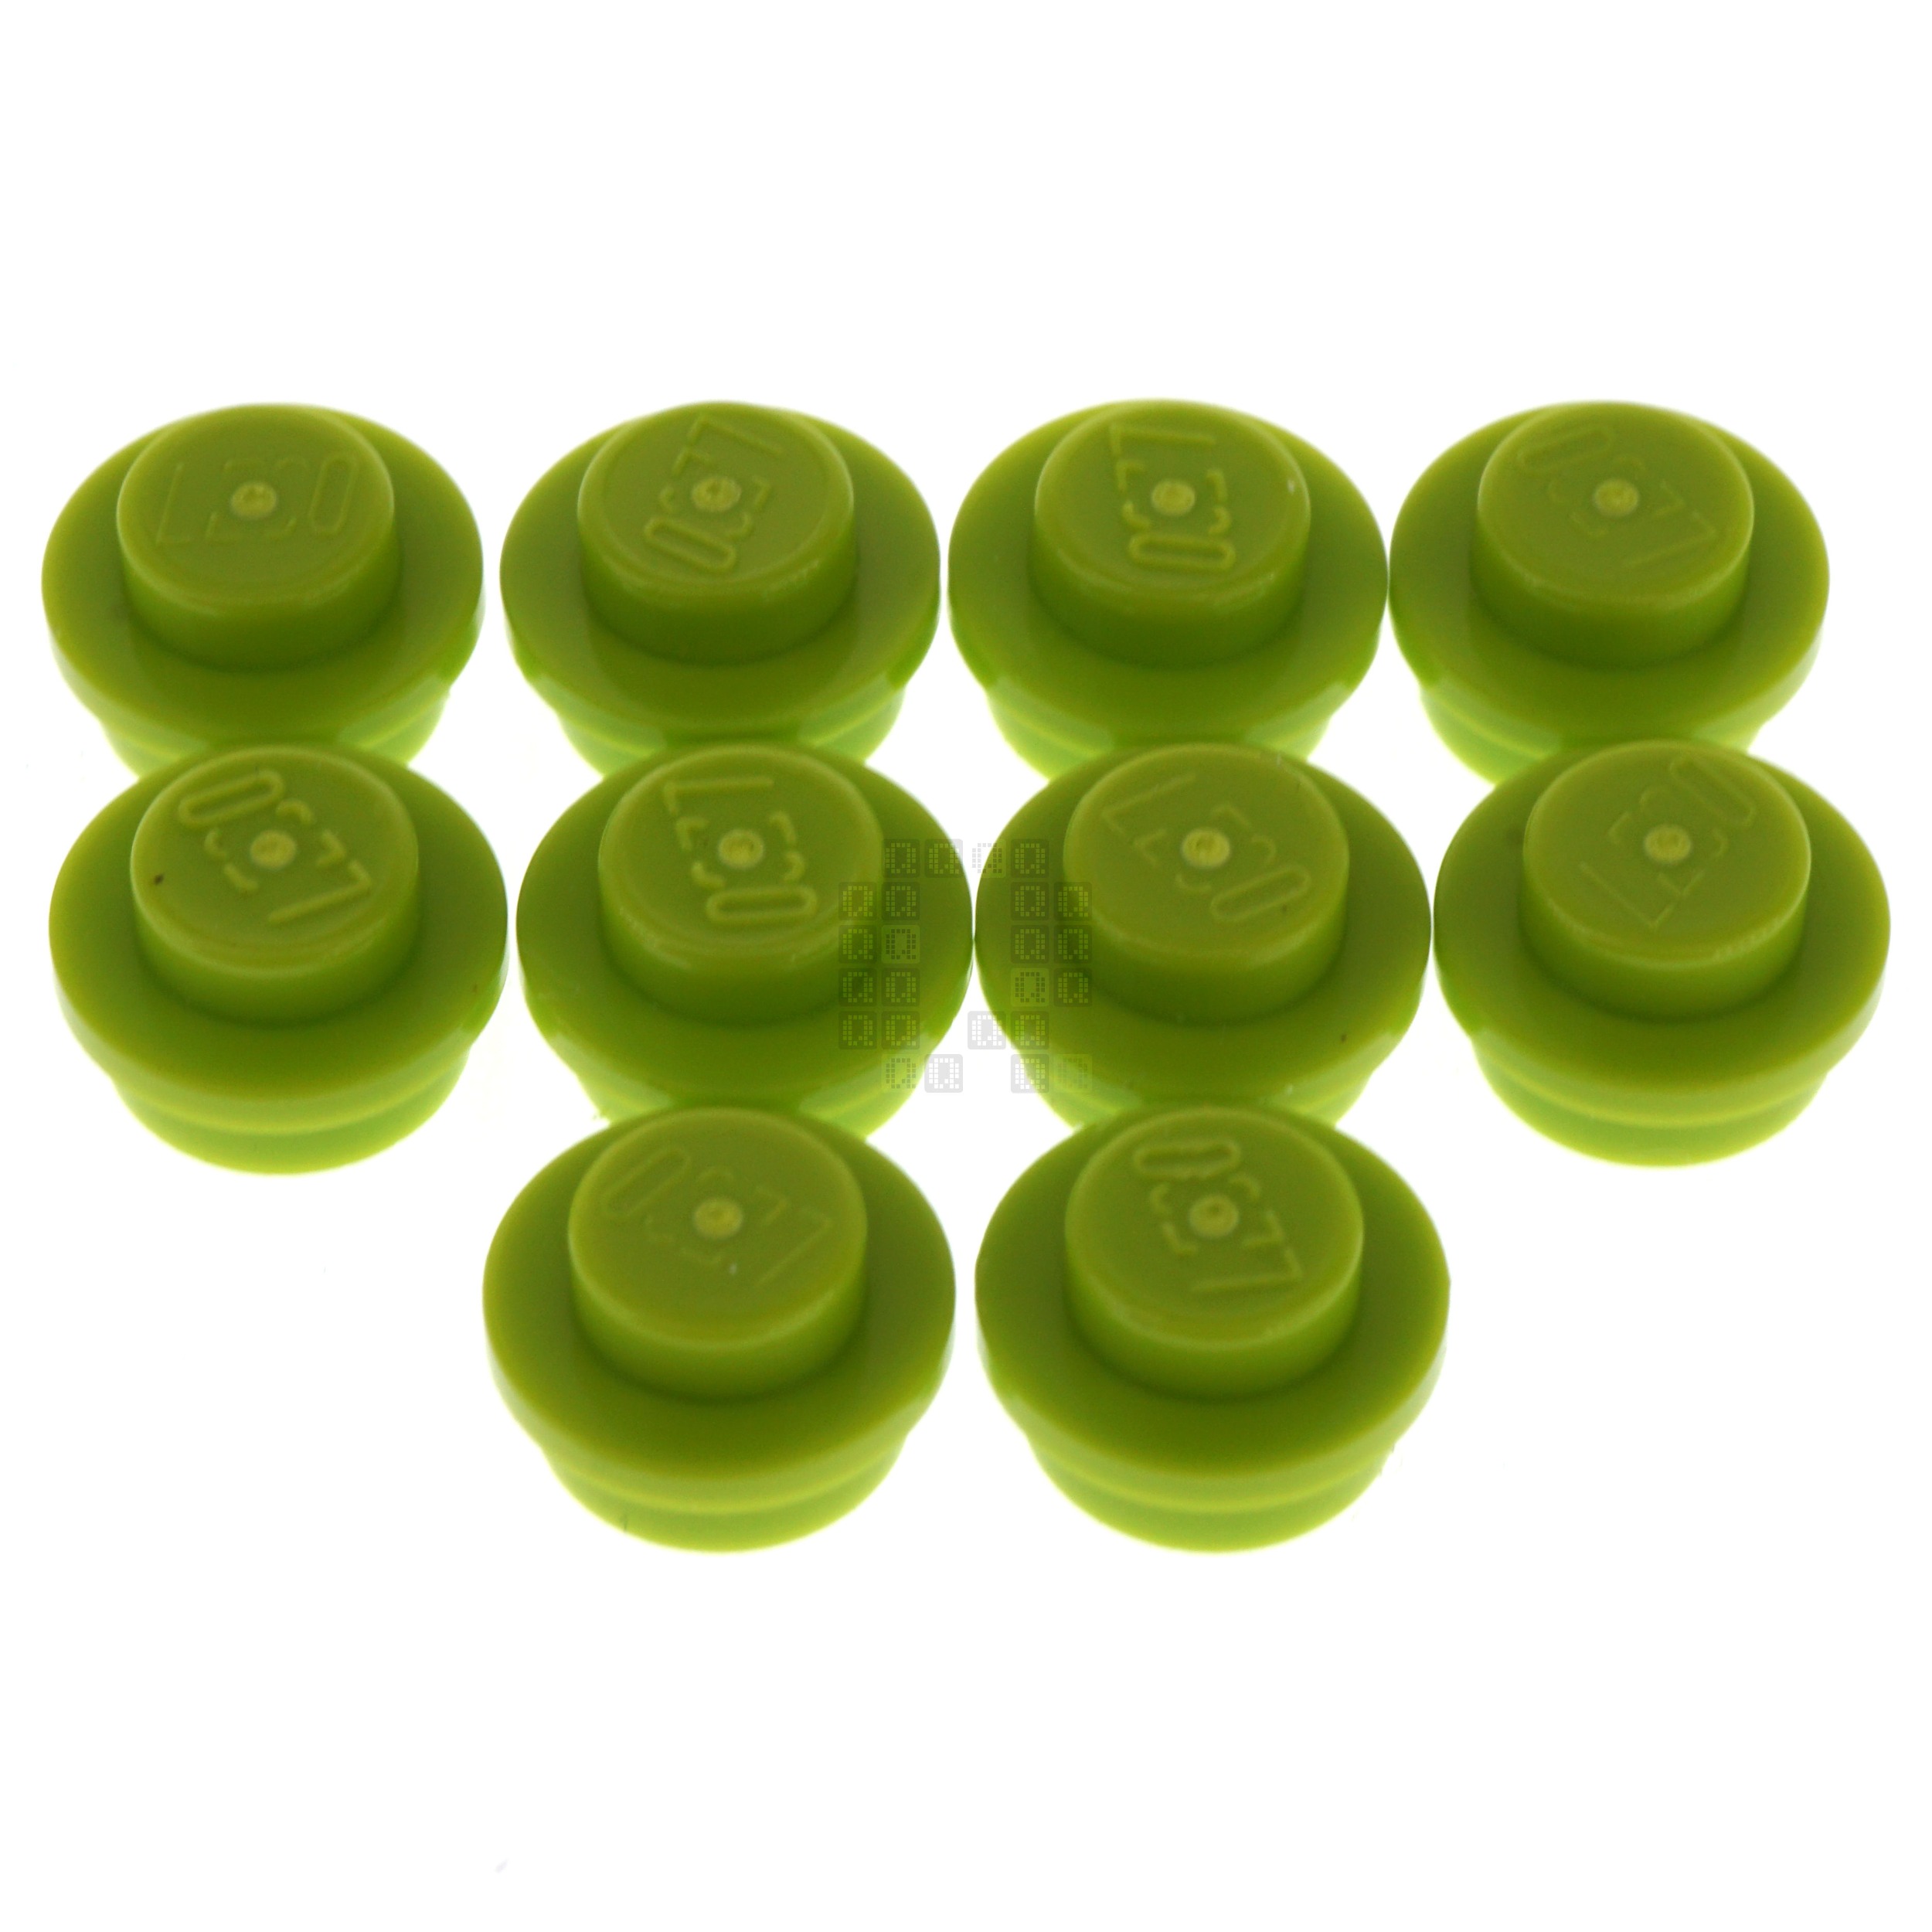 LEGO 4183133 1x1 Round Plate, Lime Green, 10-Pack